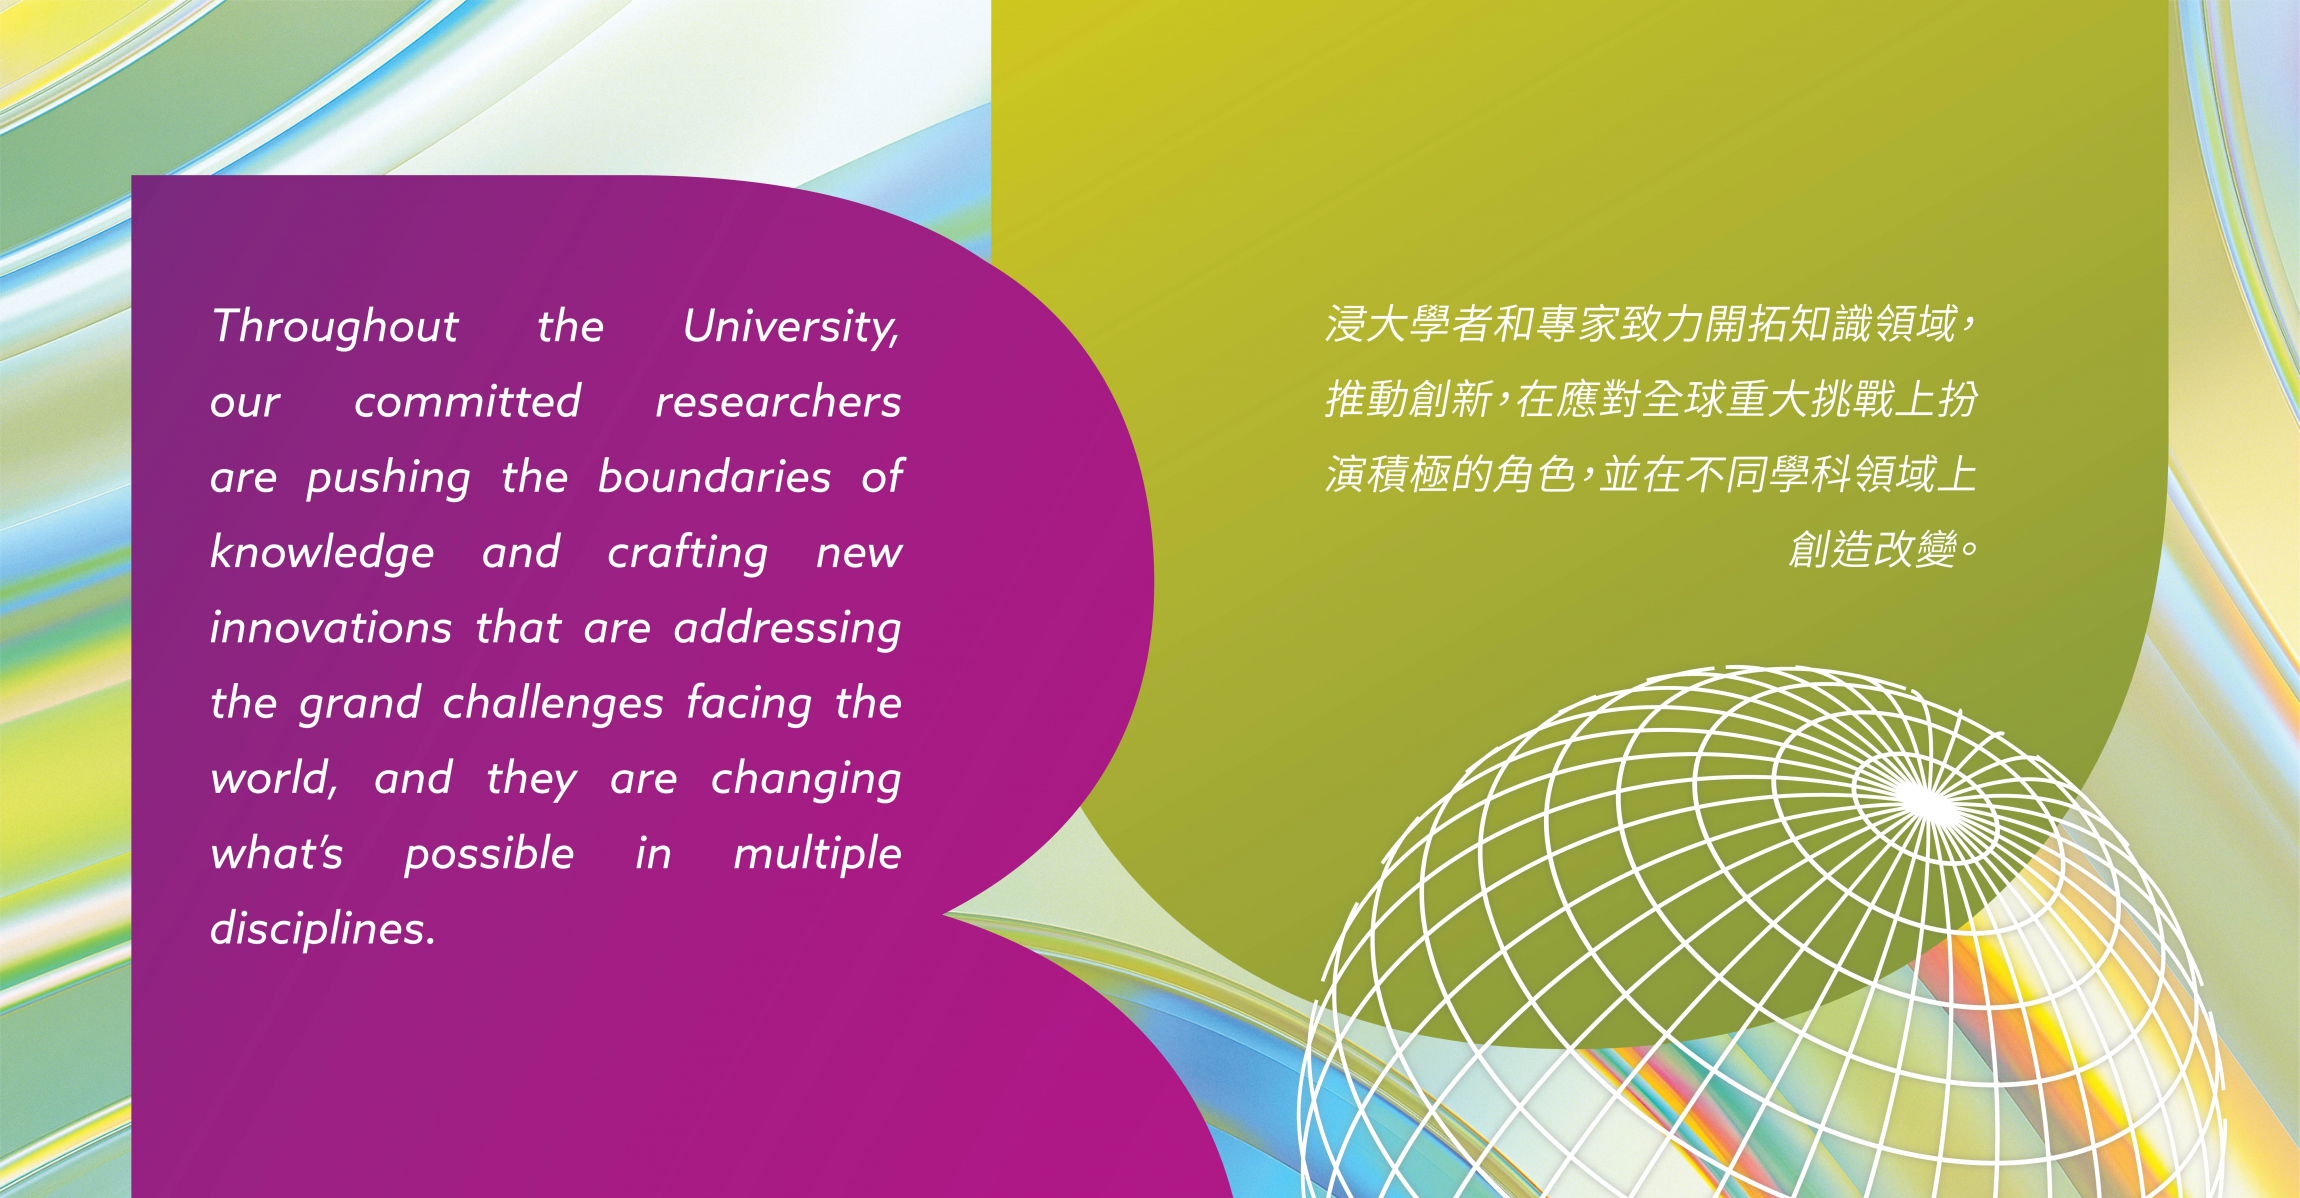 Changing the world through impactful research and knowledge transfer